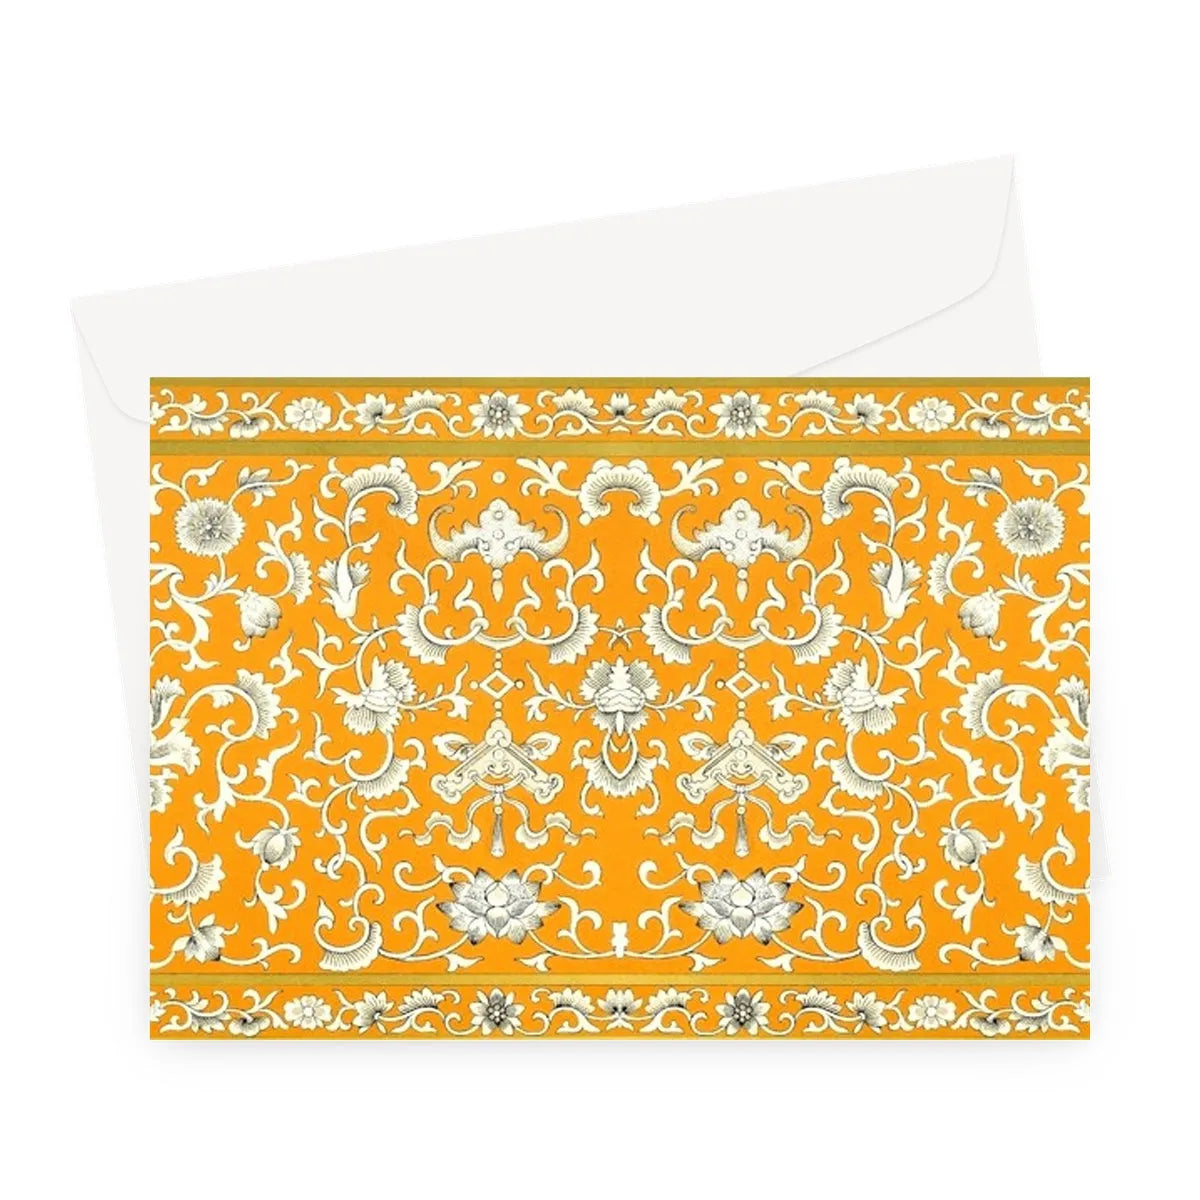 Tangerine Dream Greeting Card - A5 Landscape / 10 Cards - Greeting & Note Cards - Aesthetic Art